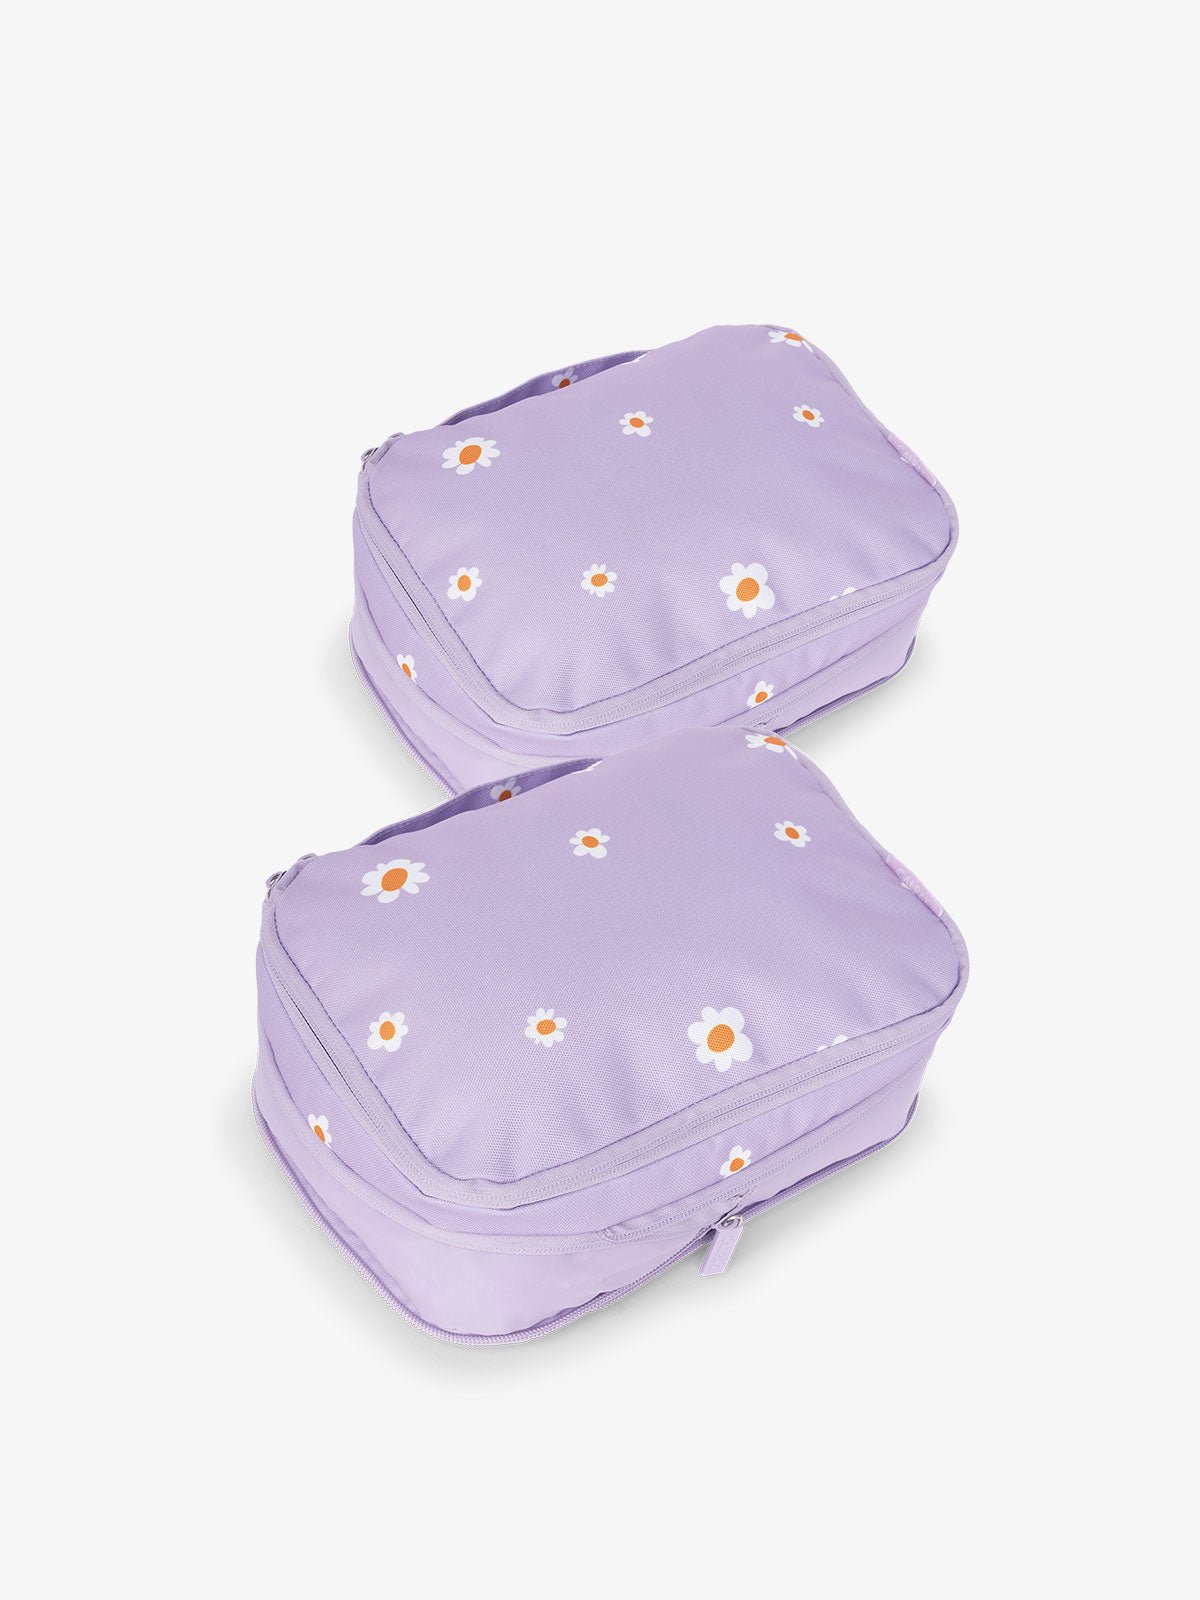 CALPAK small compression packing cubes with top handles and expandable by 4.5 inches in light purple orchid fields